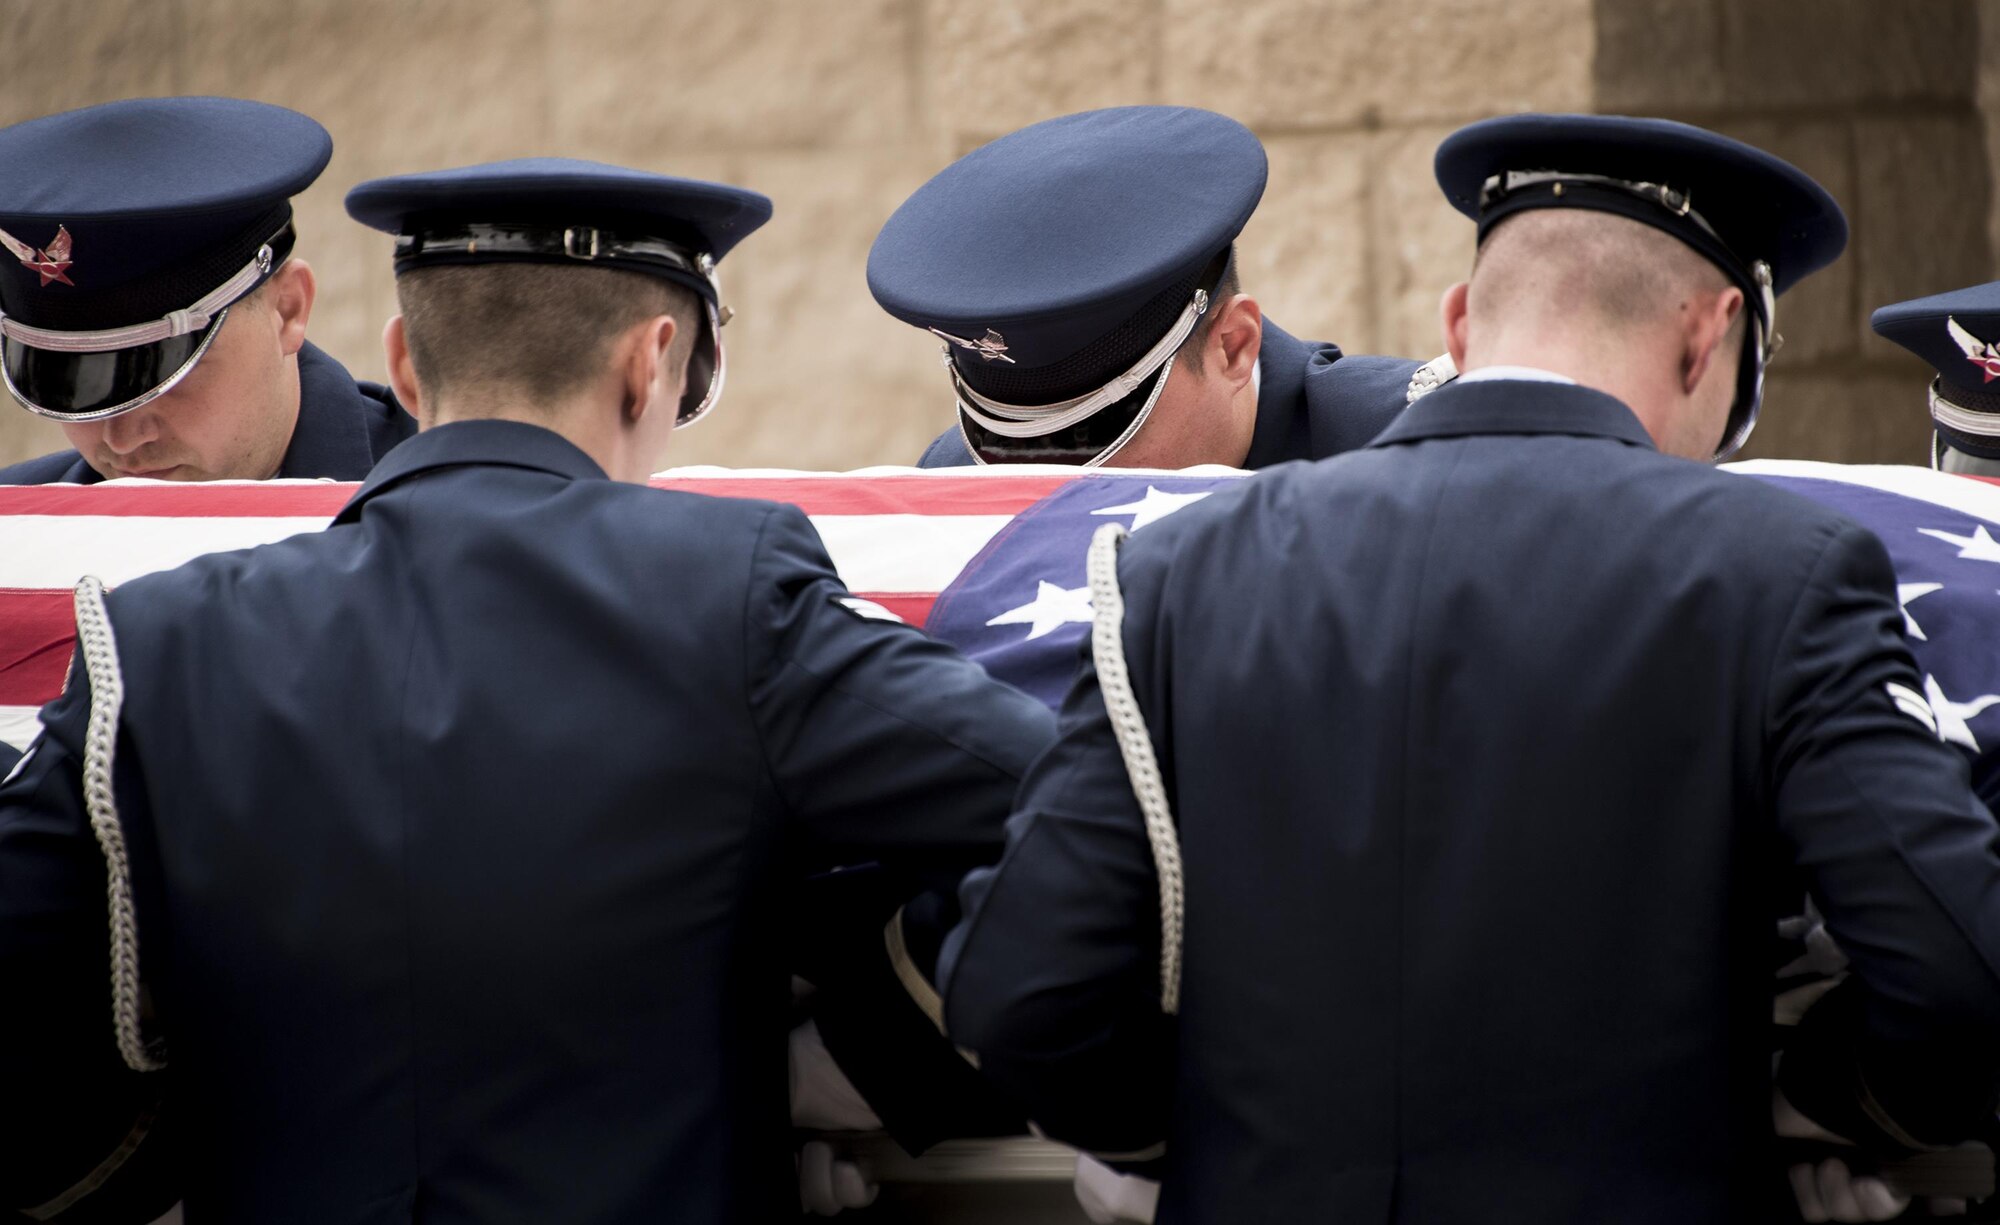 Honor Guard Airmen carry a casket out of a hearse during the unit’s graduation ceremony at Eglin Air Force Base, Fla., March 1.  Approximately 12 new Airmen graduated from the 120-plus-hour course. The graduation performance includes flag detail, rifle volley, pall bearers and bugler for friends, family and unit commanders. (U.S. Air Force photo/Samuel King Jr.)